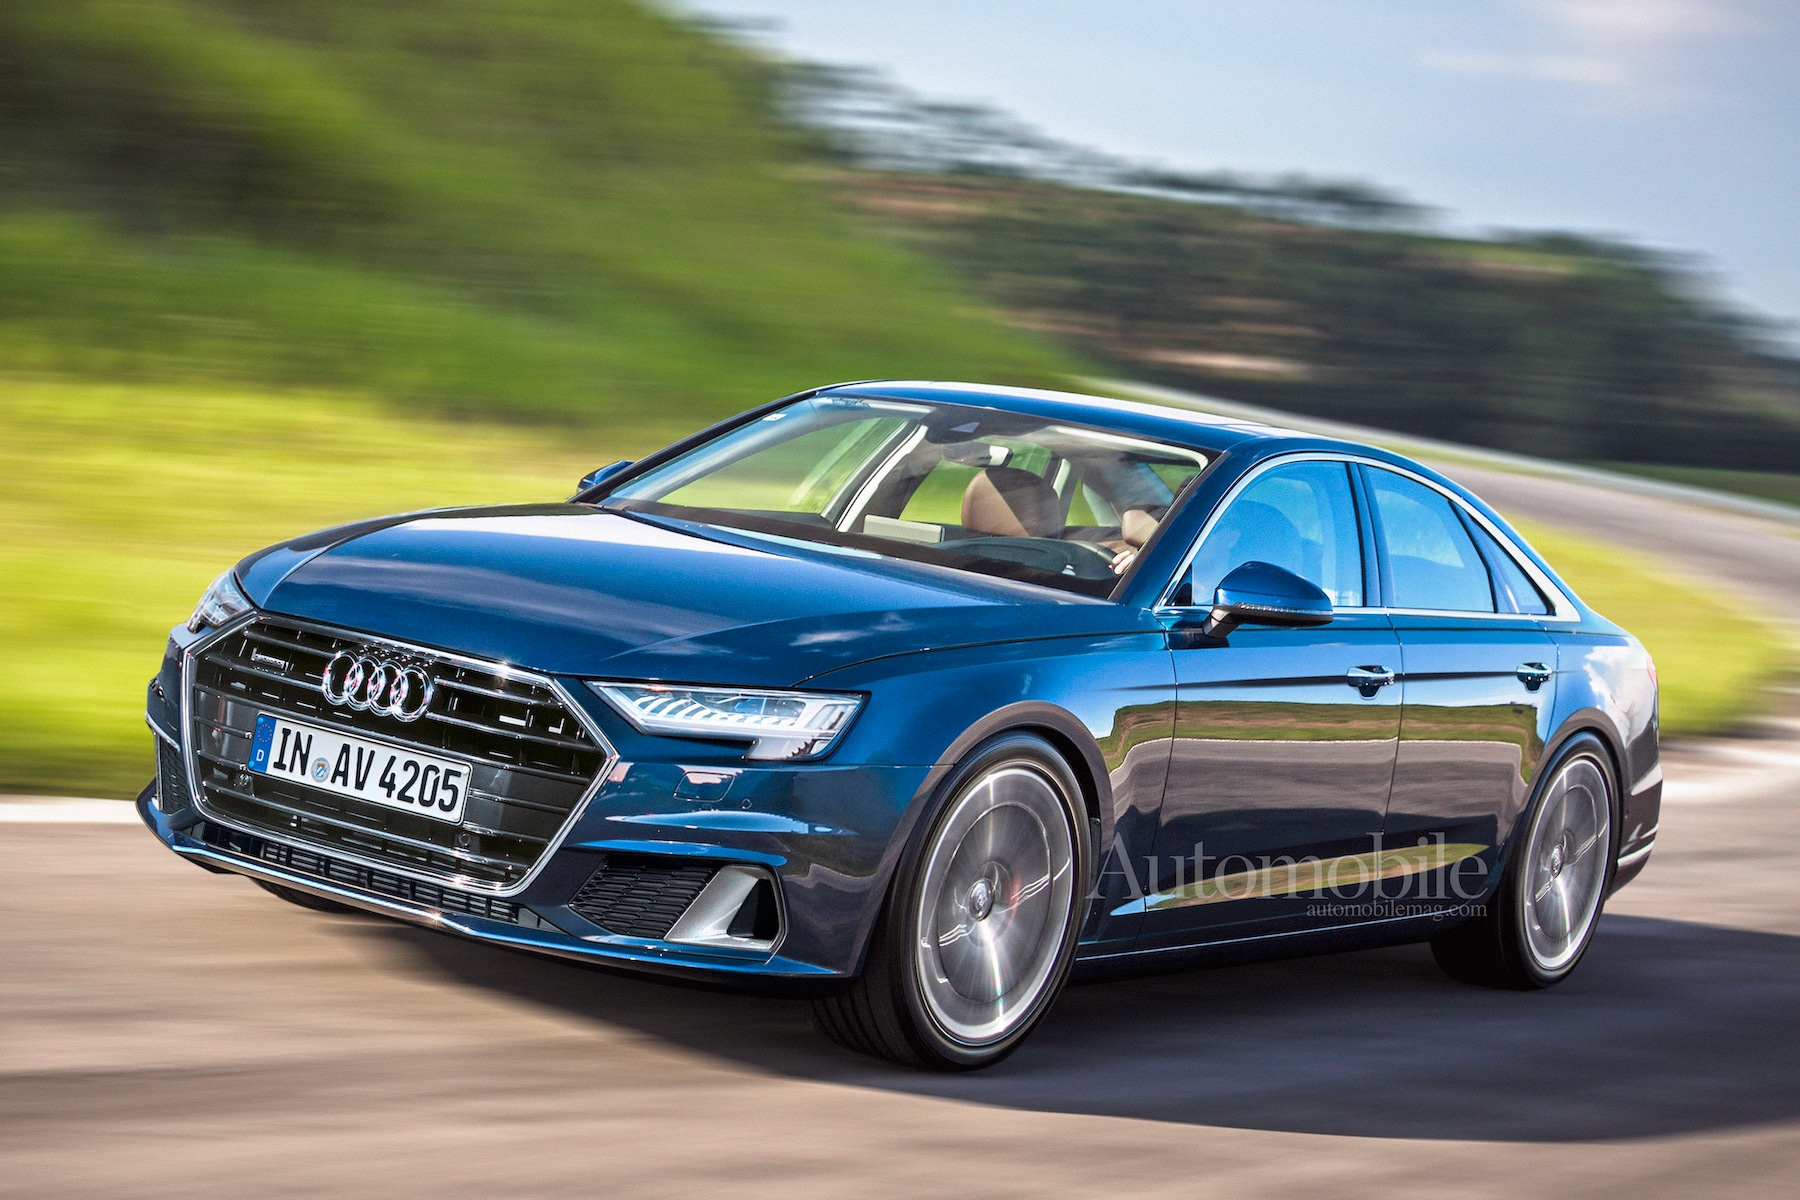 The Fate of the Next Audi A4 Has Been Decided—It Stays a Proper Audi